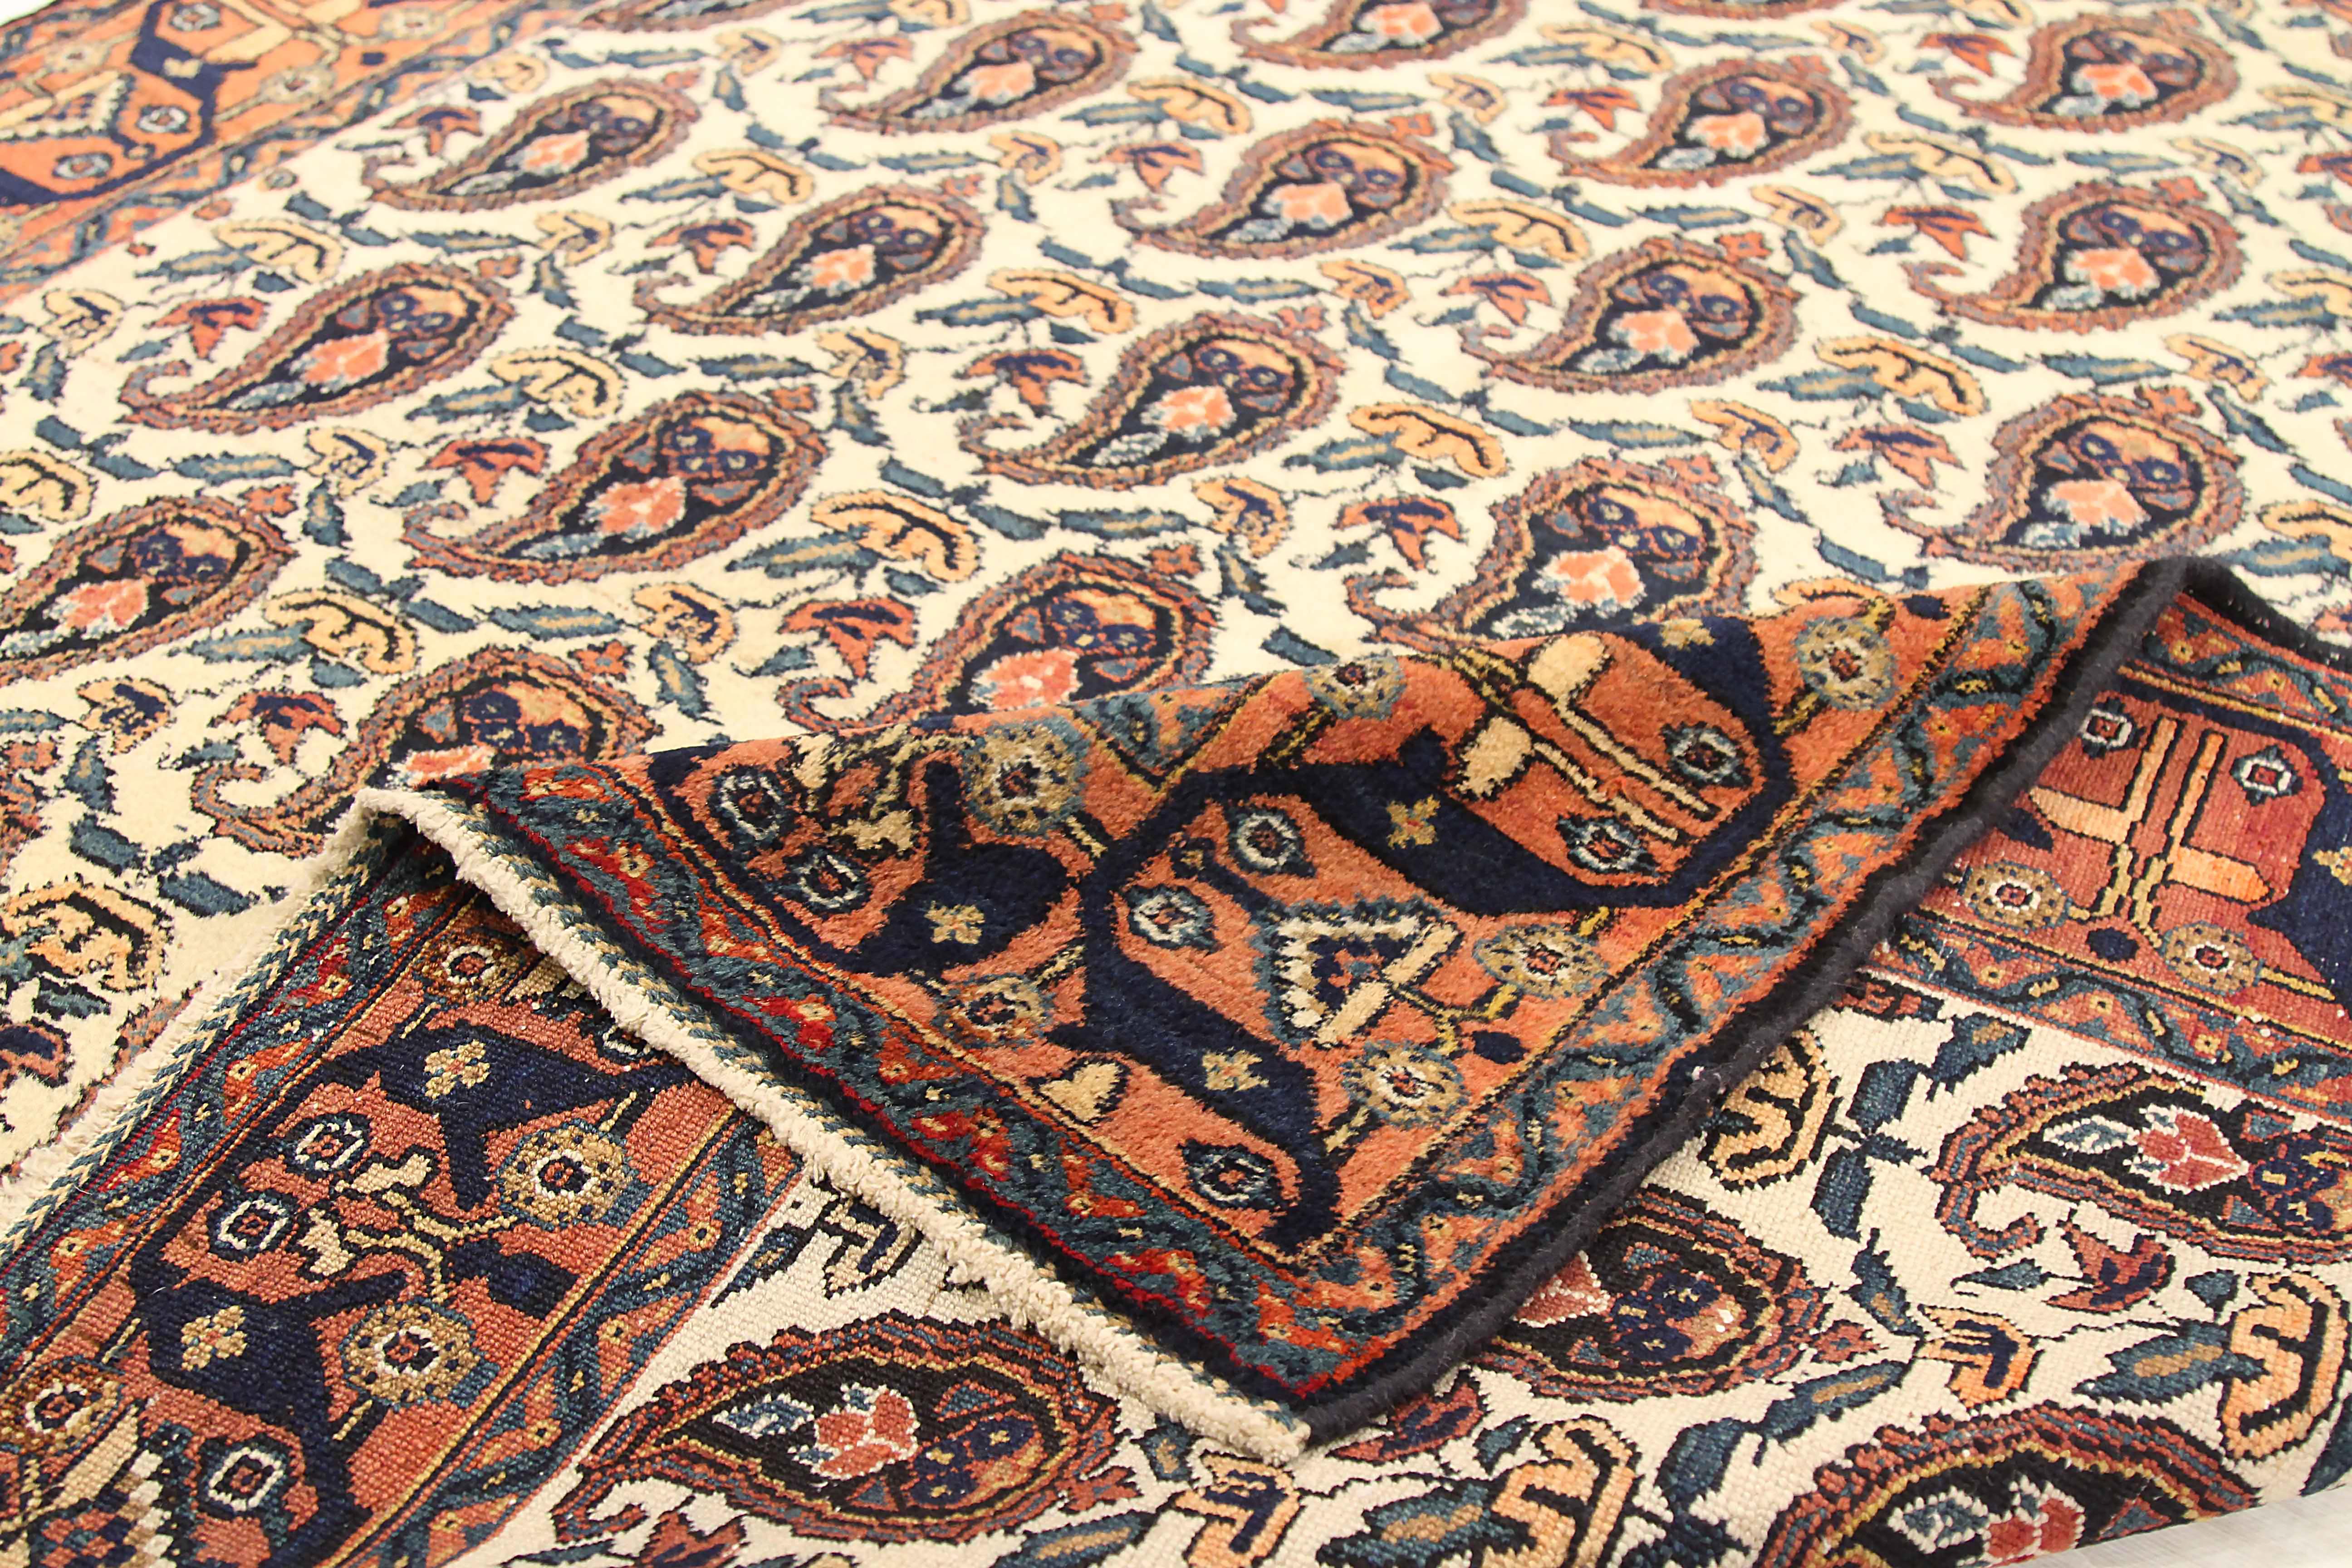 Other Antique Persian Area Rug Isfahan Design For Sale